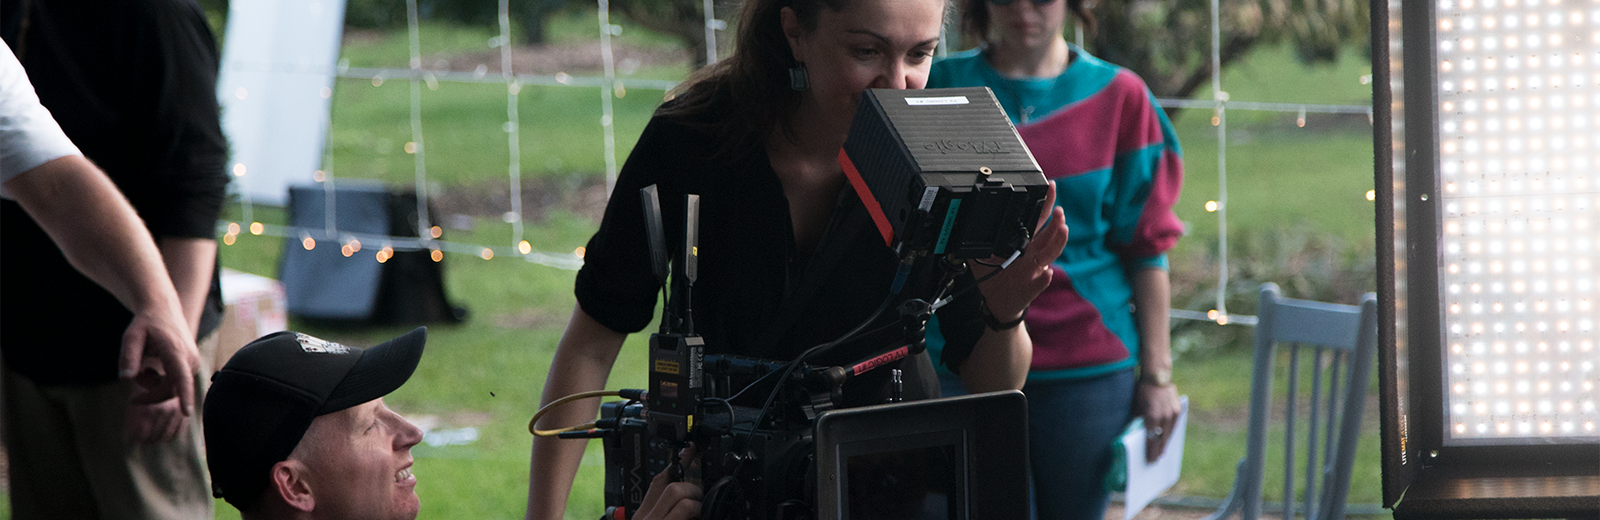 A cinematographer on location frames the scene through a camera's viewfinder as her camera assistant waits at the ready.